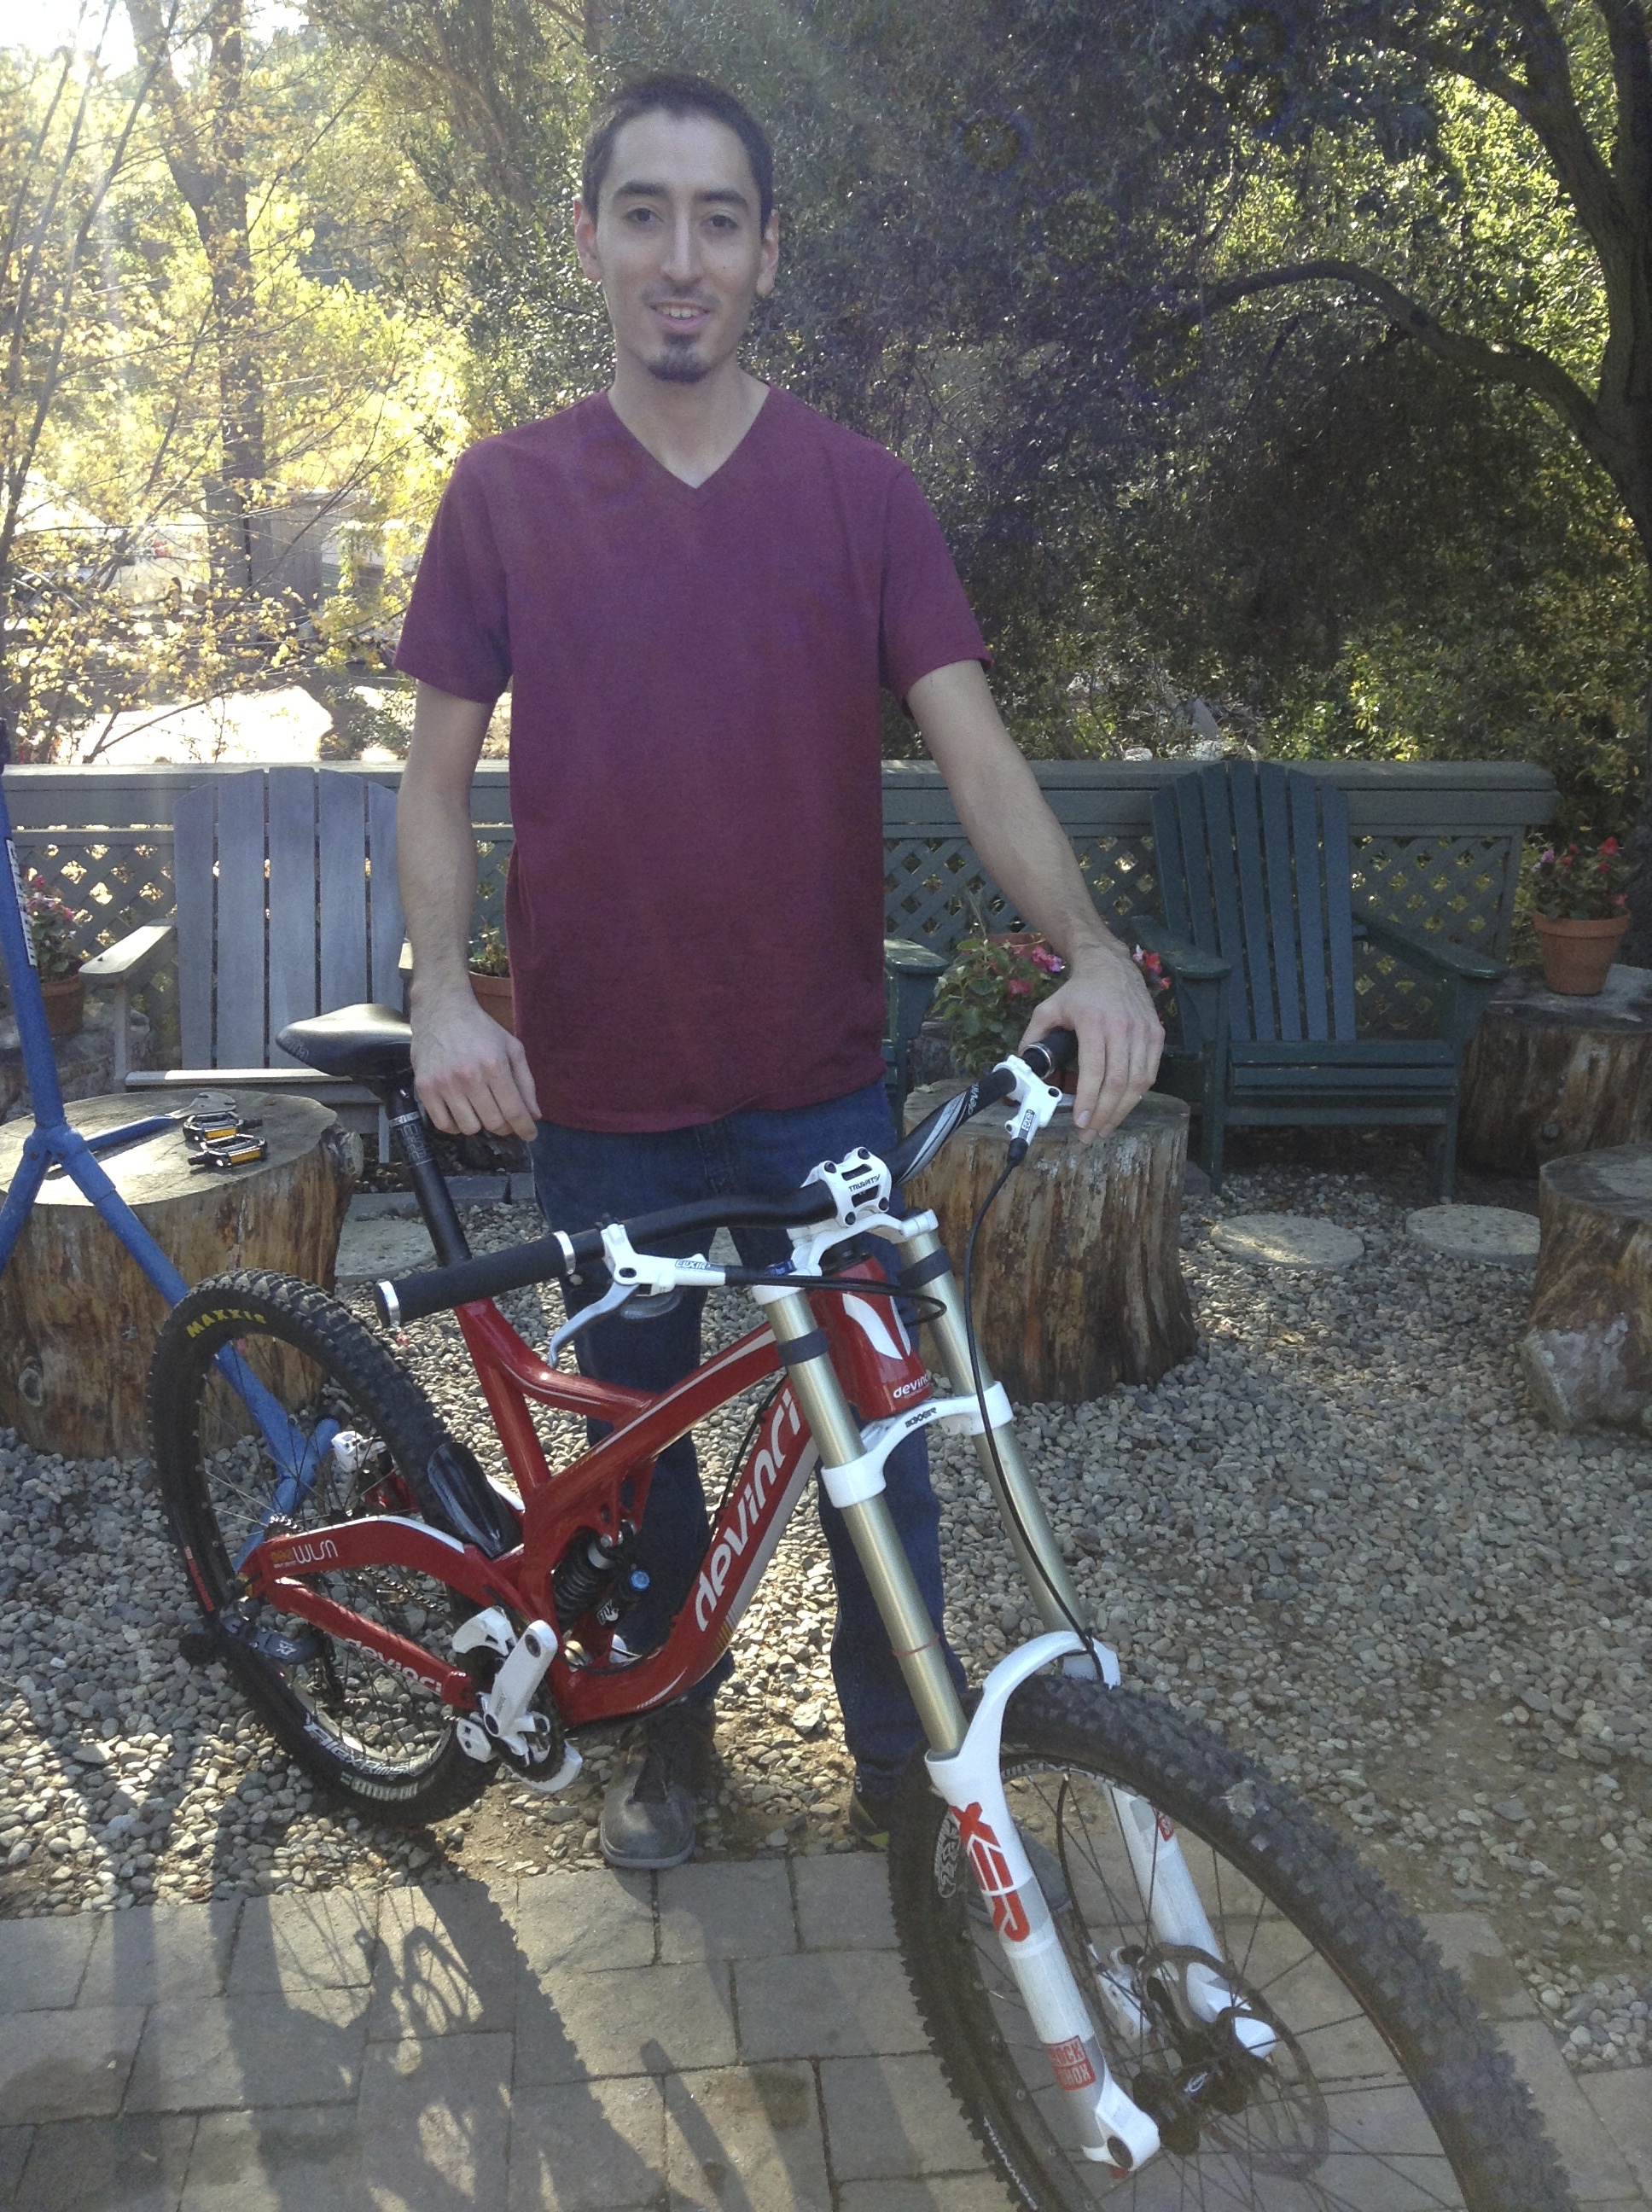 Jorge saw the Devinci Wilson on our website and drove up from Loma Linda after working a 12 hours night shift. What a champ! It's the perfect bike for his weekend trips to Big Bear.